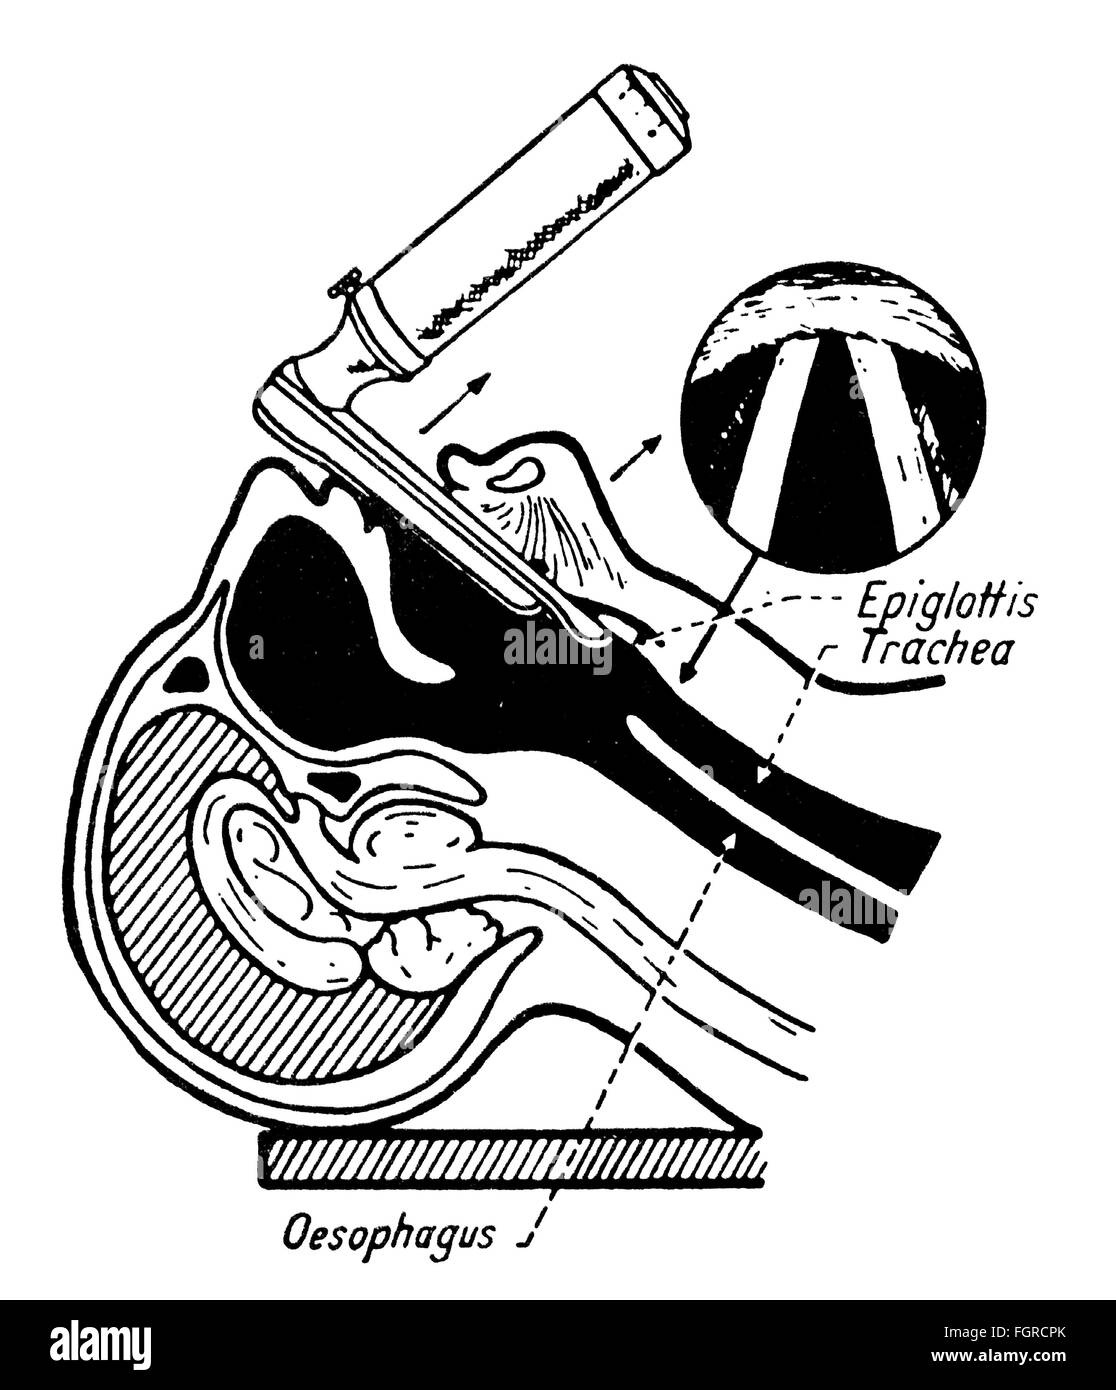 medicine, instruments / equipment, laryngoscope, oral intubation, drawing, out of: E.Rahmer, 'Entwicklung der Modernen Anaesthesie', Stuttgart, 1966, Additional-Rights-Clearences-Not Available Stock Photo